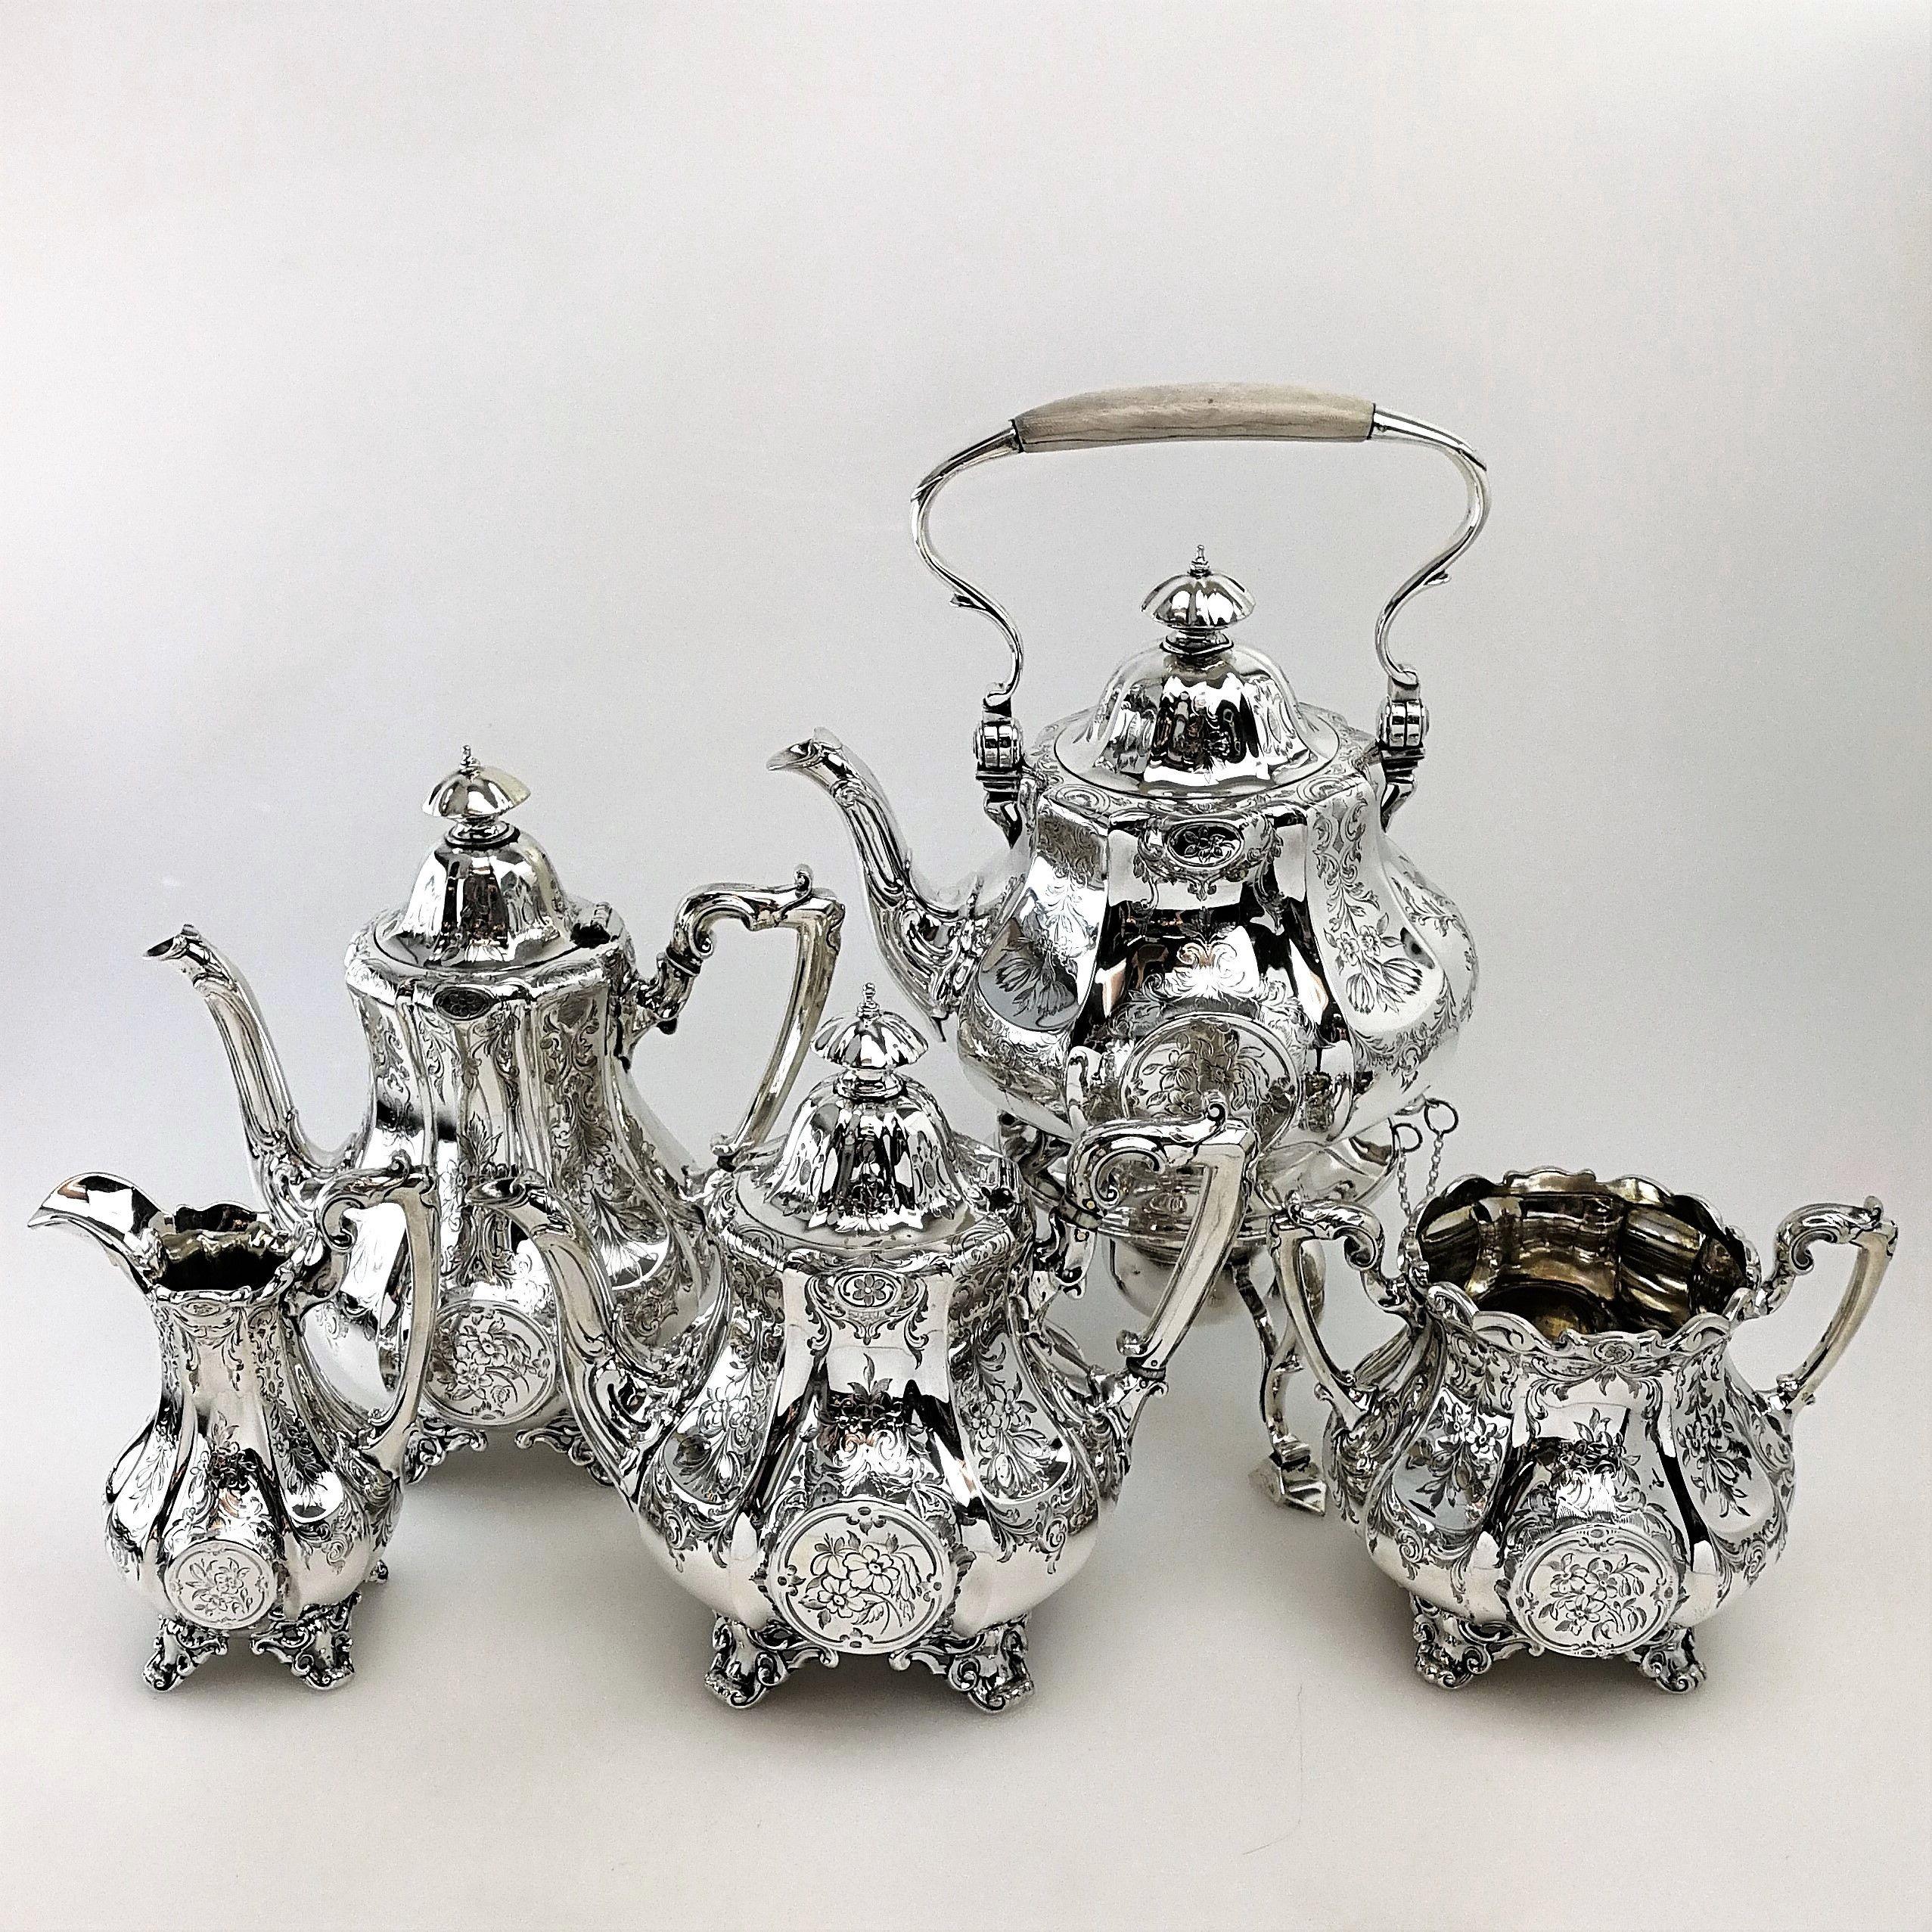 An antique Victorian 5-piece solid Silver Tea Set comprising of a Kettle on Stand with burner, Teapot, Coffee Pot, Sugar Bowl & Cream / Milk Jug. The Tea Set has an elegant panelled octagonal shape and is embellished with gorgeous floral engraving.